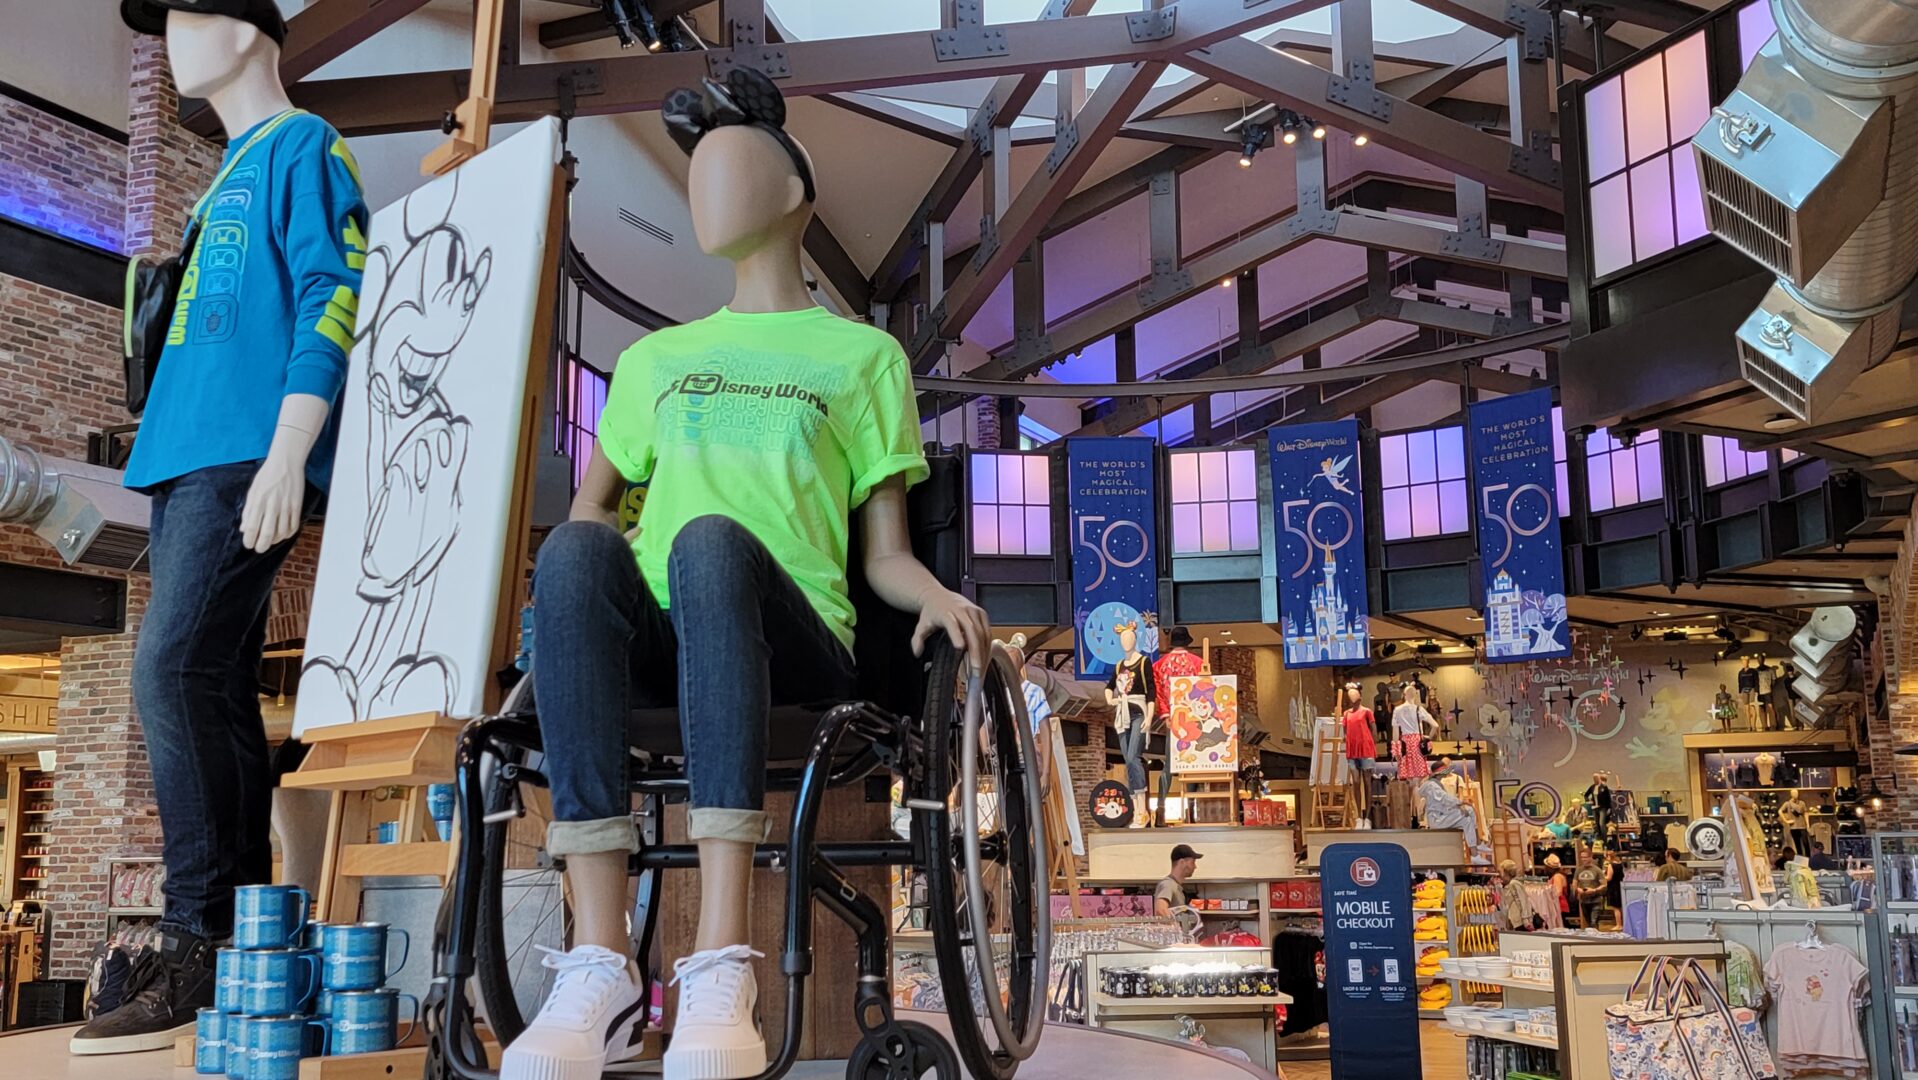 Mannequin in Wheelchair Added to World of Disney in Disney Springs